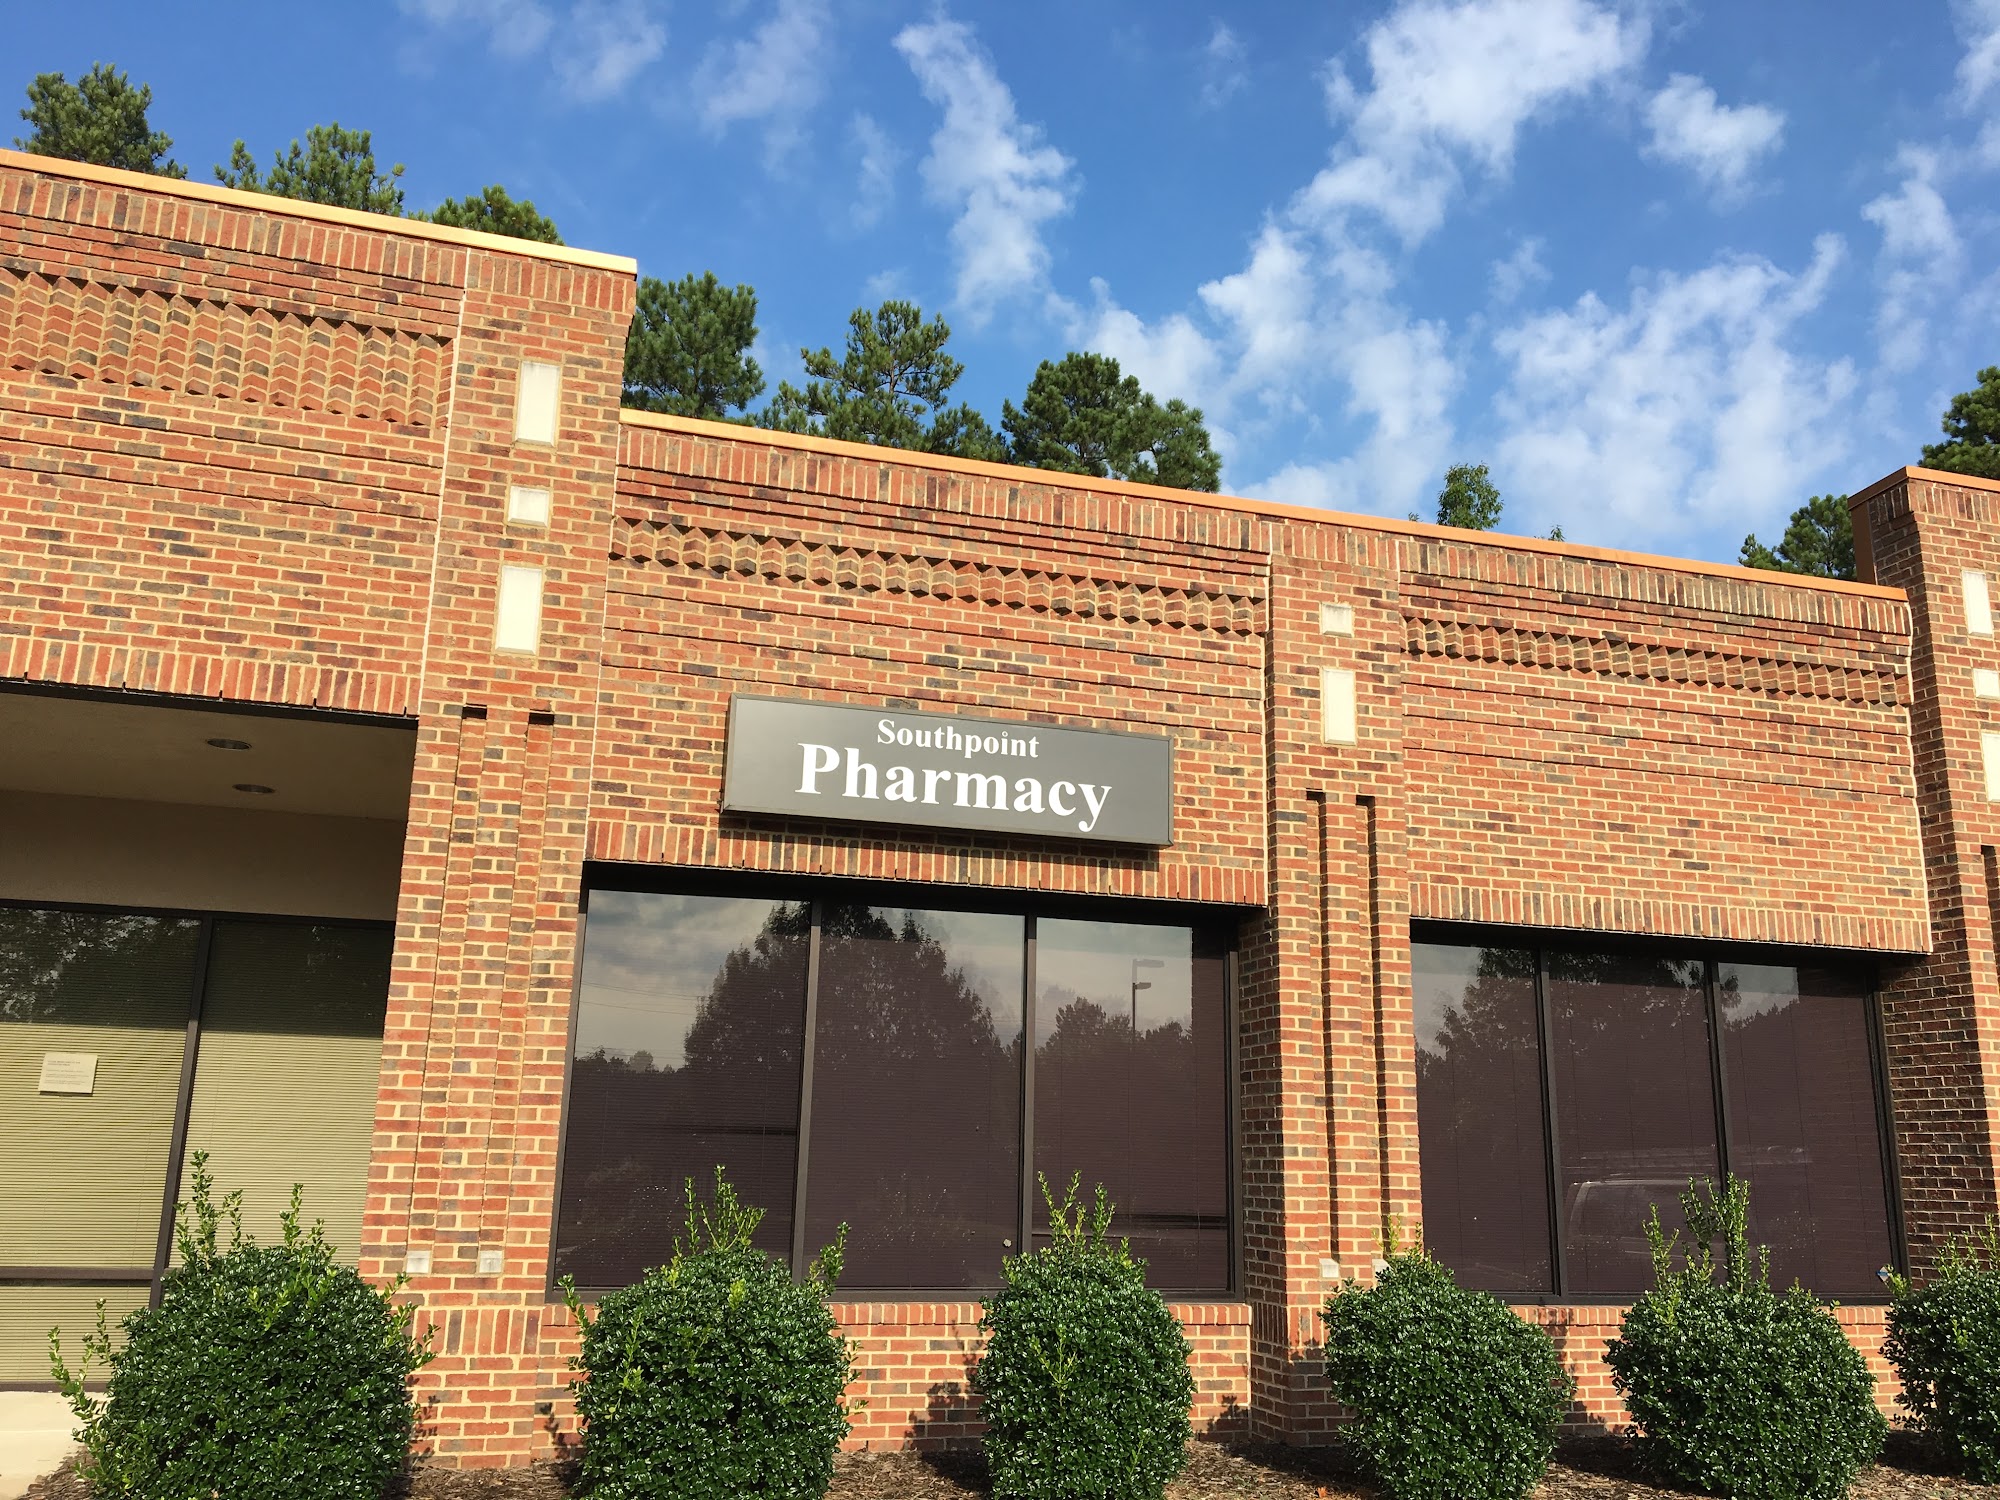 Southpoint Pharmacy